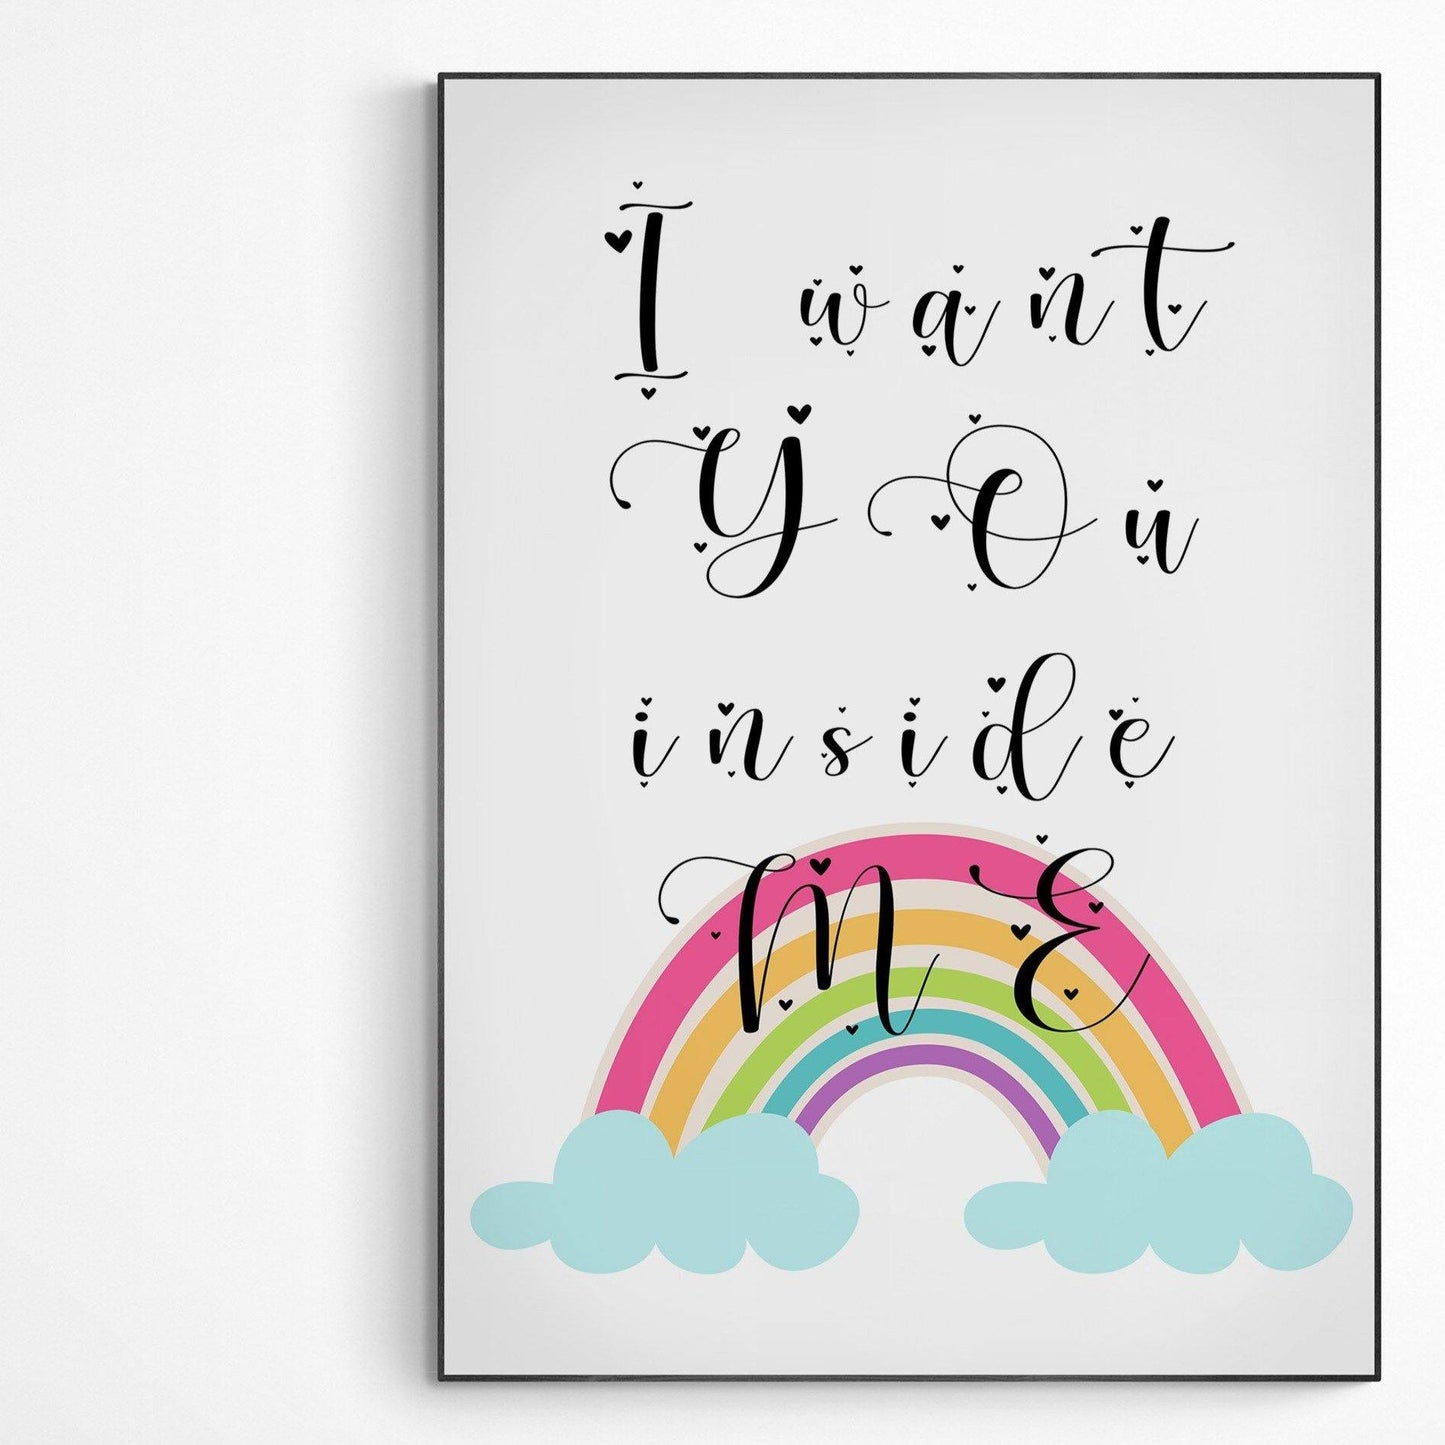 I WANT YOU inside me Print | Original Poster Art | Fun Print Quote | Motivational Poster Wall Art Decor | Greeting Card Gifts | Variety Sizes